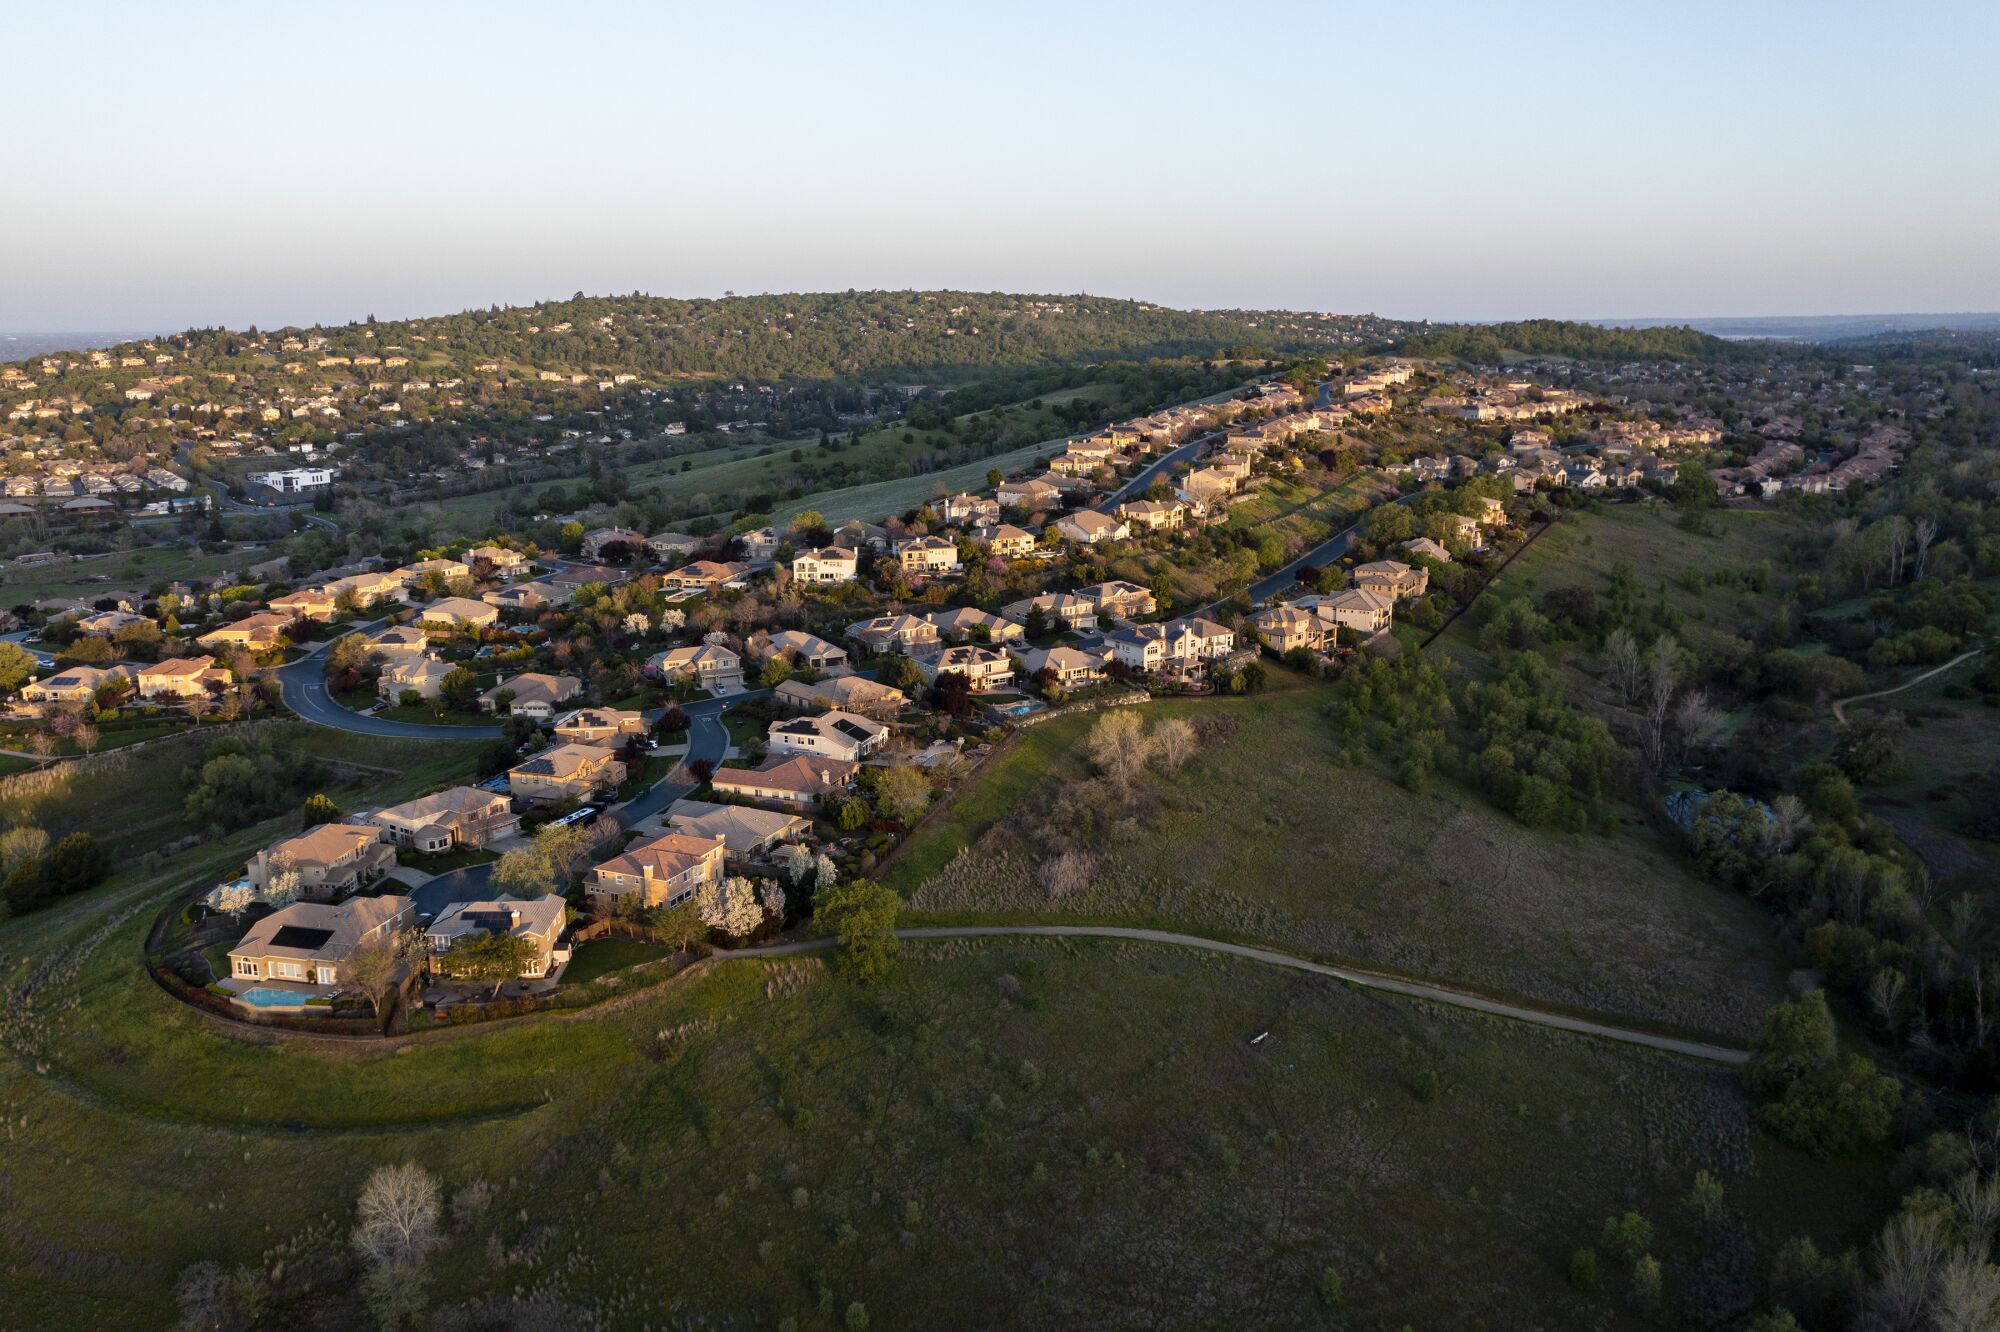 Overhead view of homes on a ridge